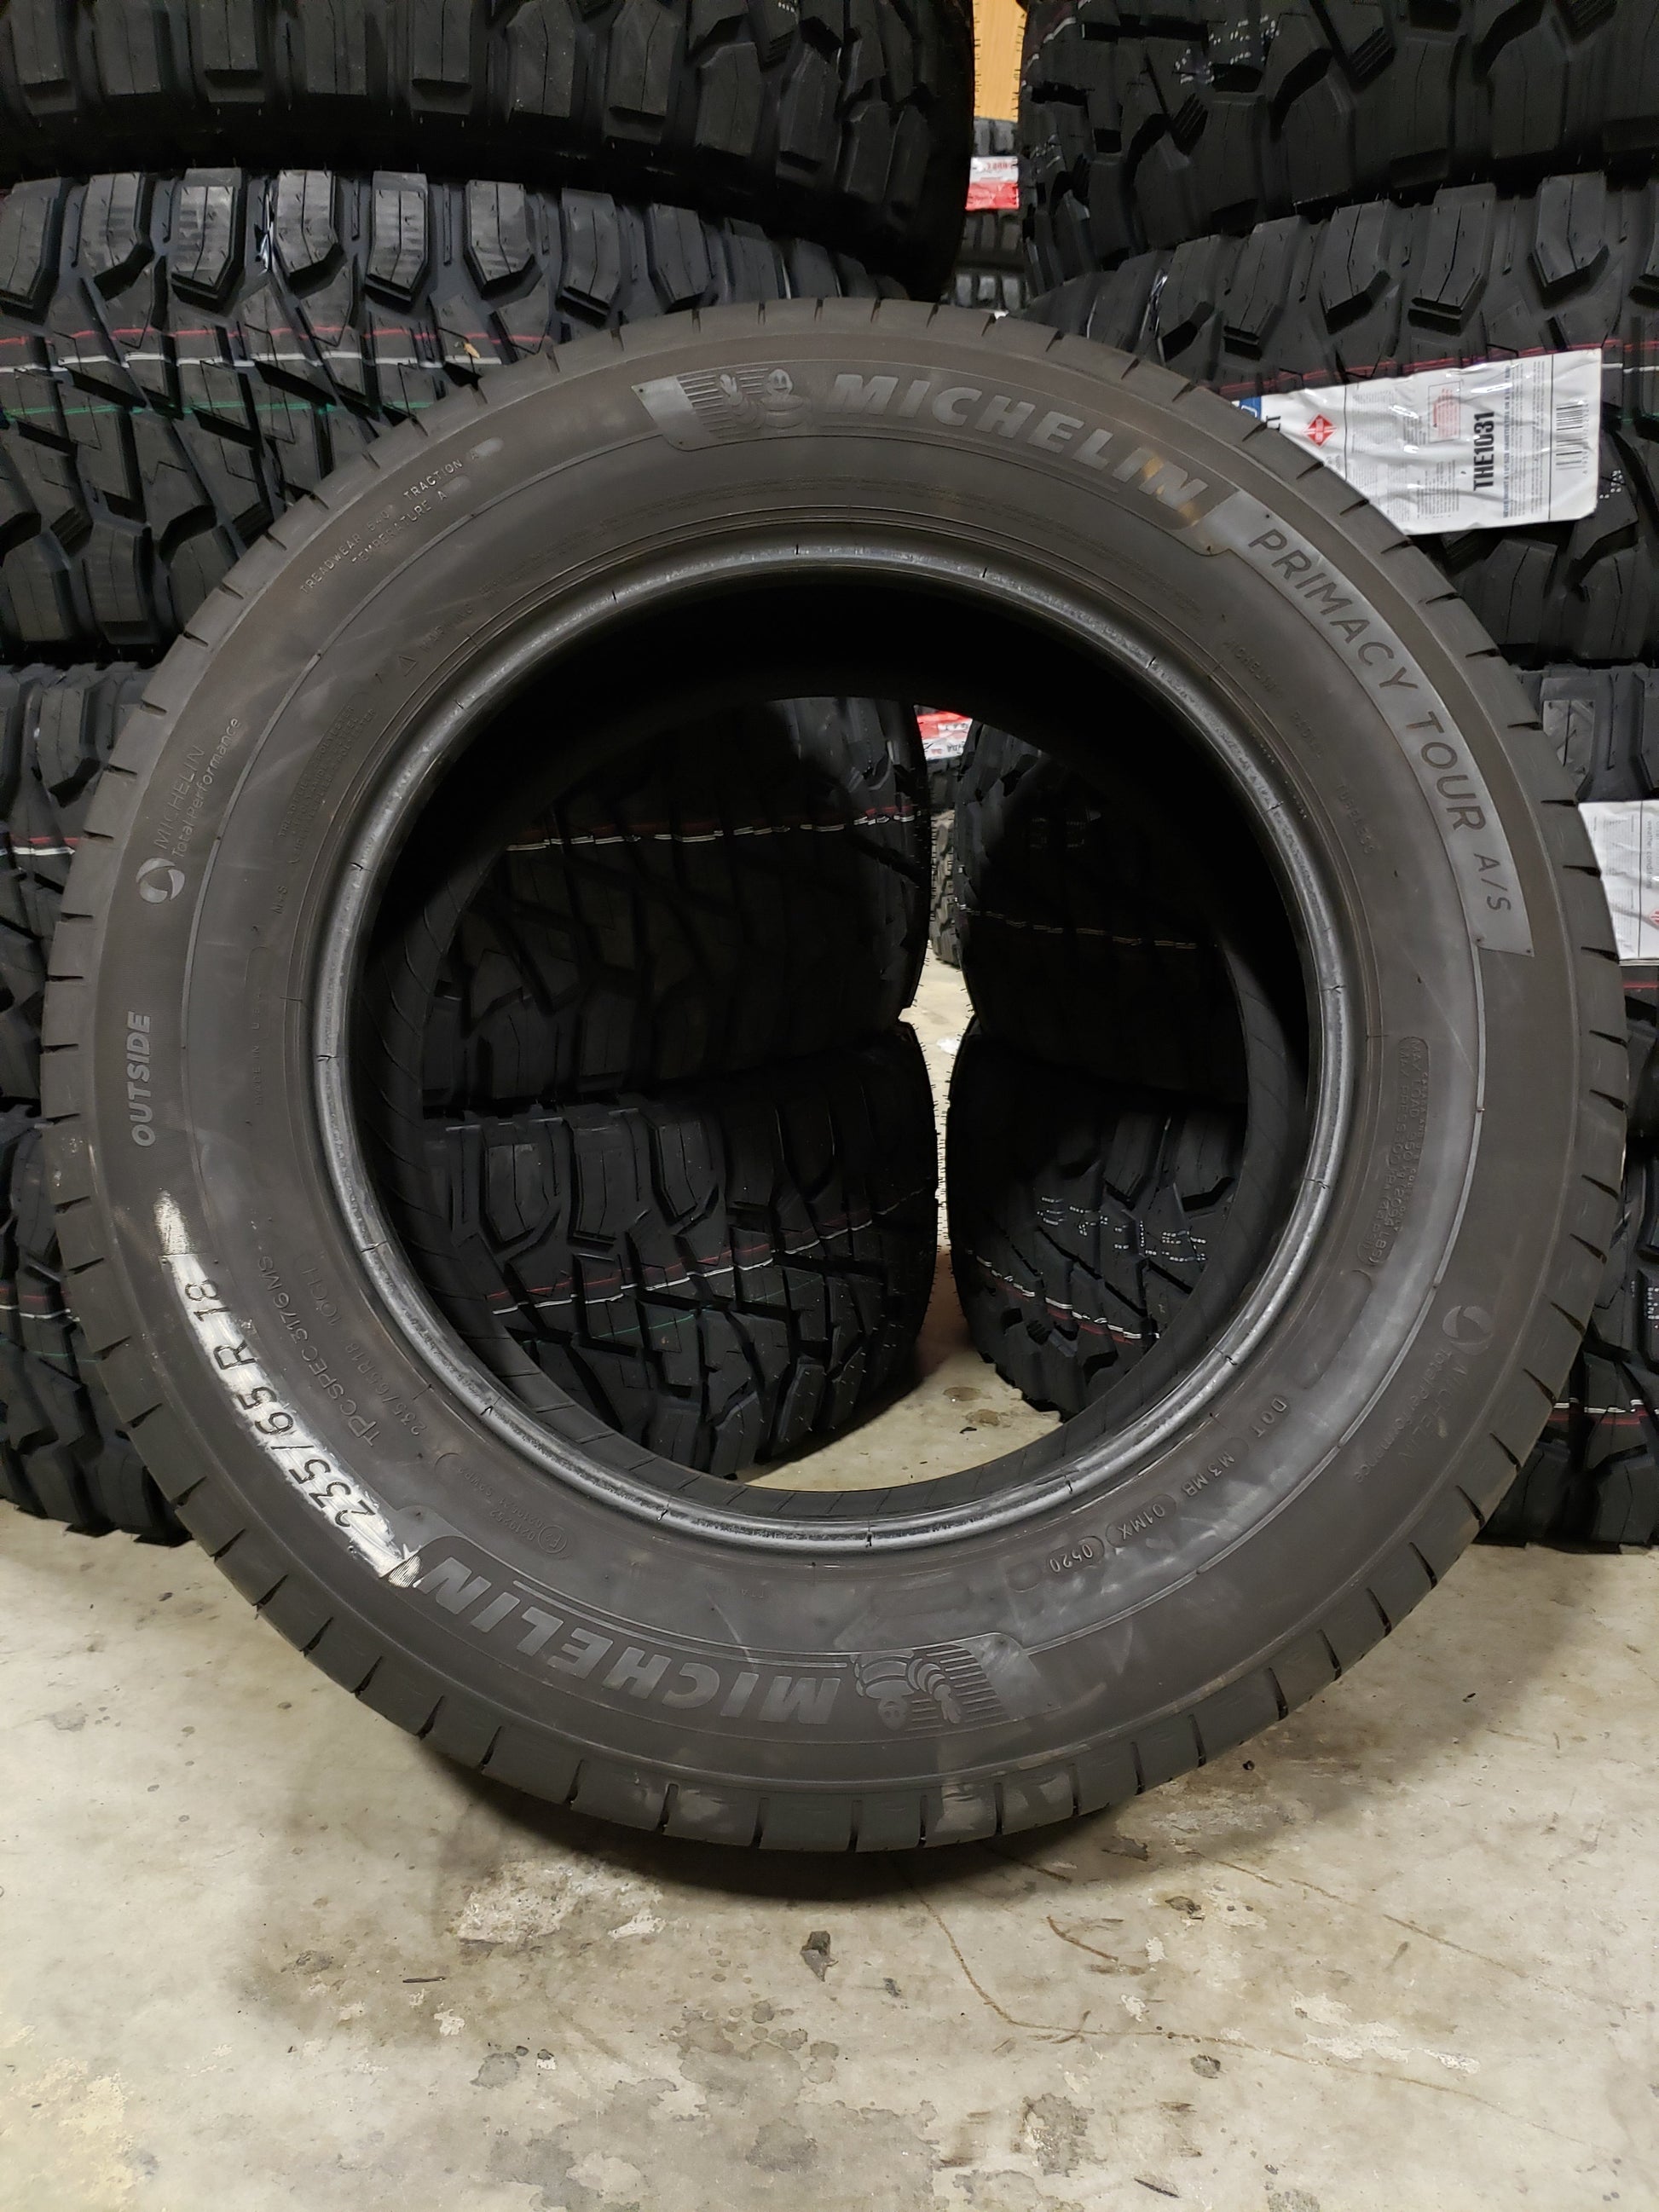 SINLGE 235/65R18 Michelin Primacy Tour A/S 106 H - Used Tires